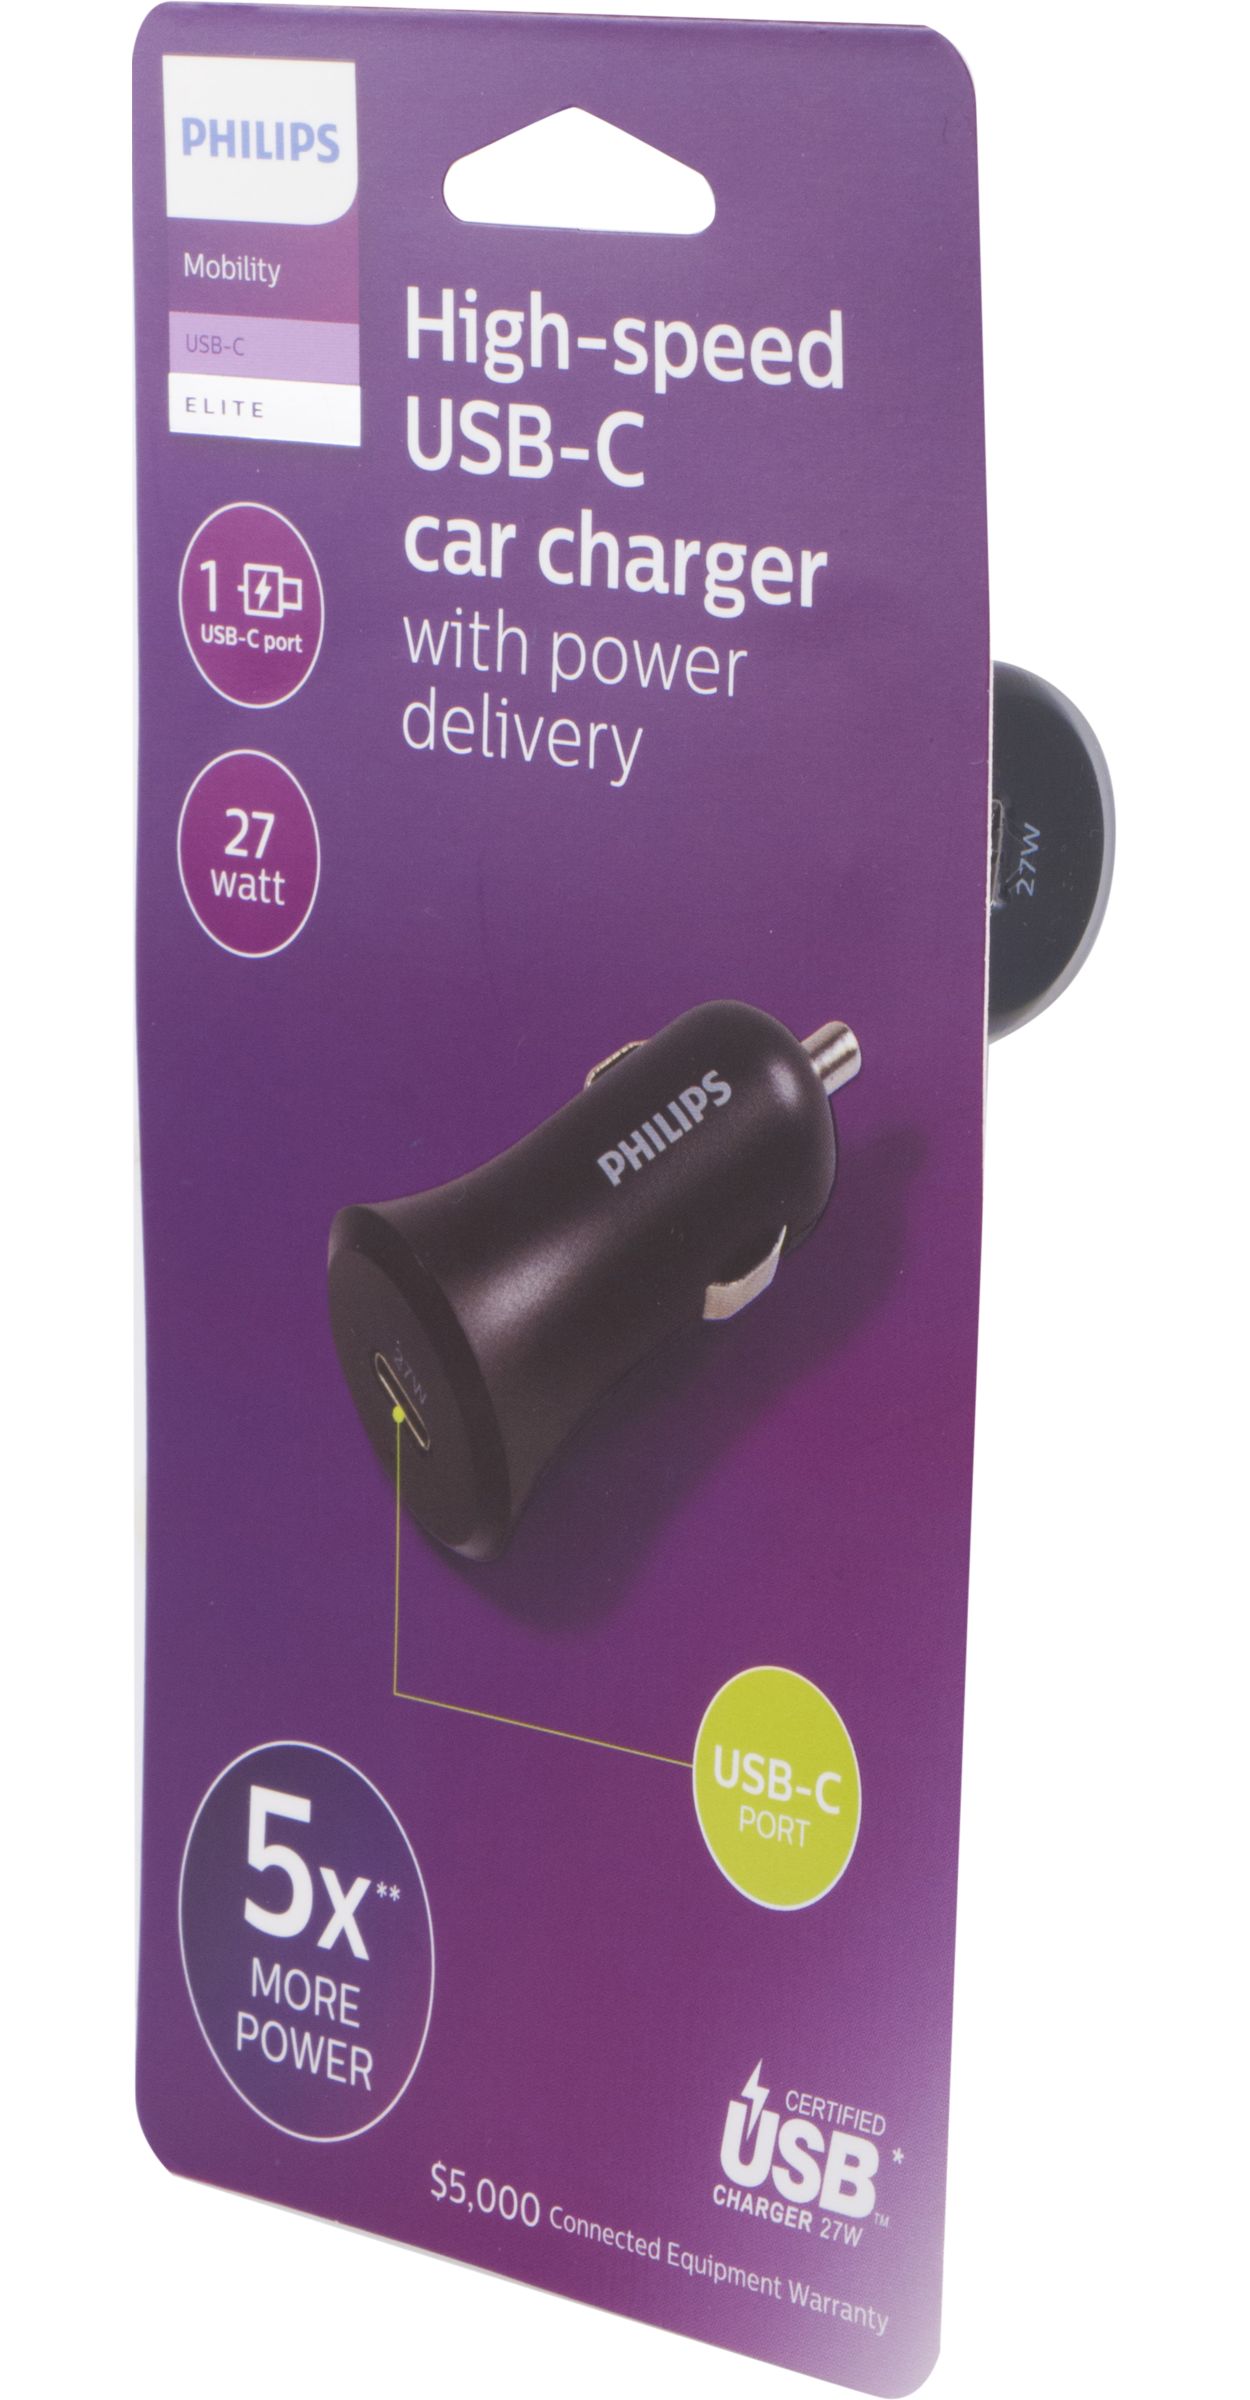 Car Charger, 1C Port 27W Power Delivery DLP2559Q/37